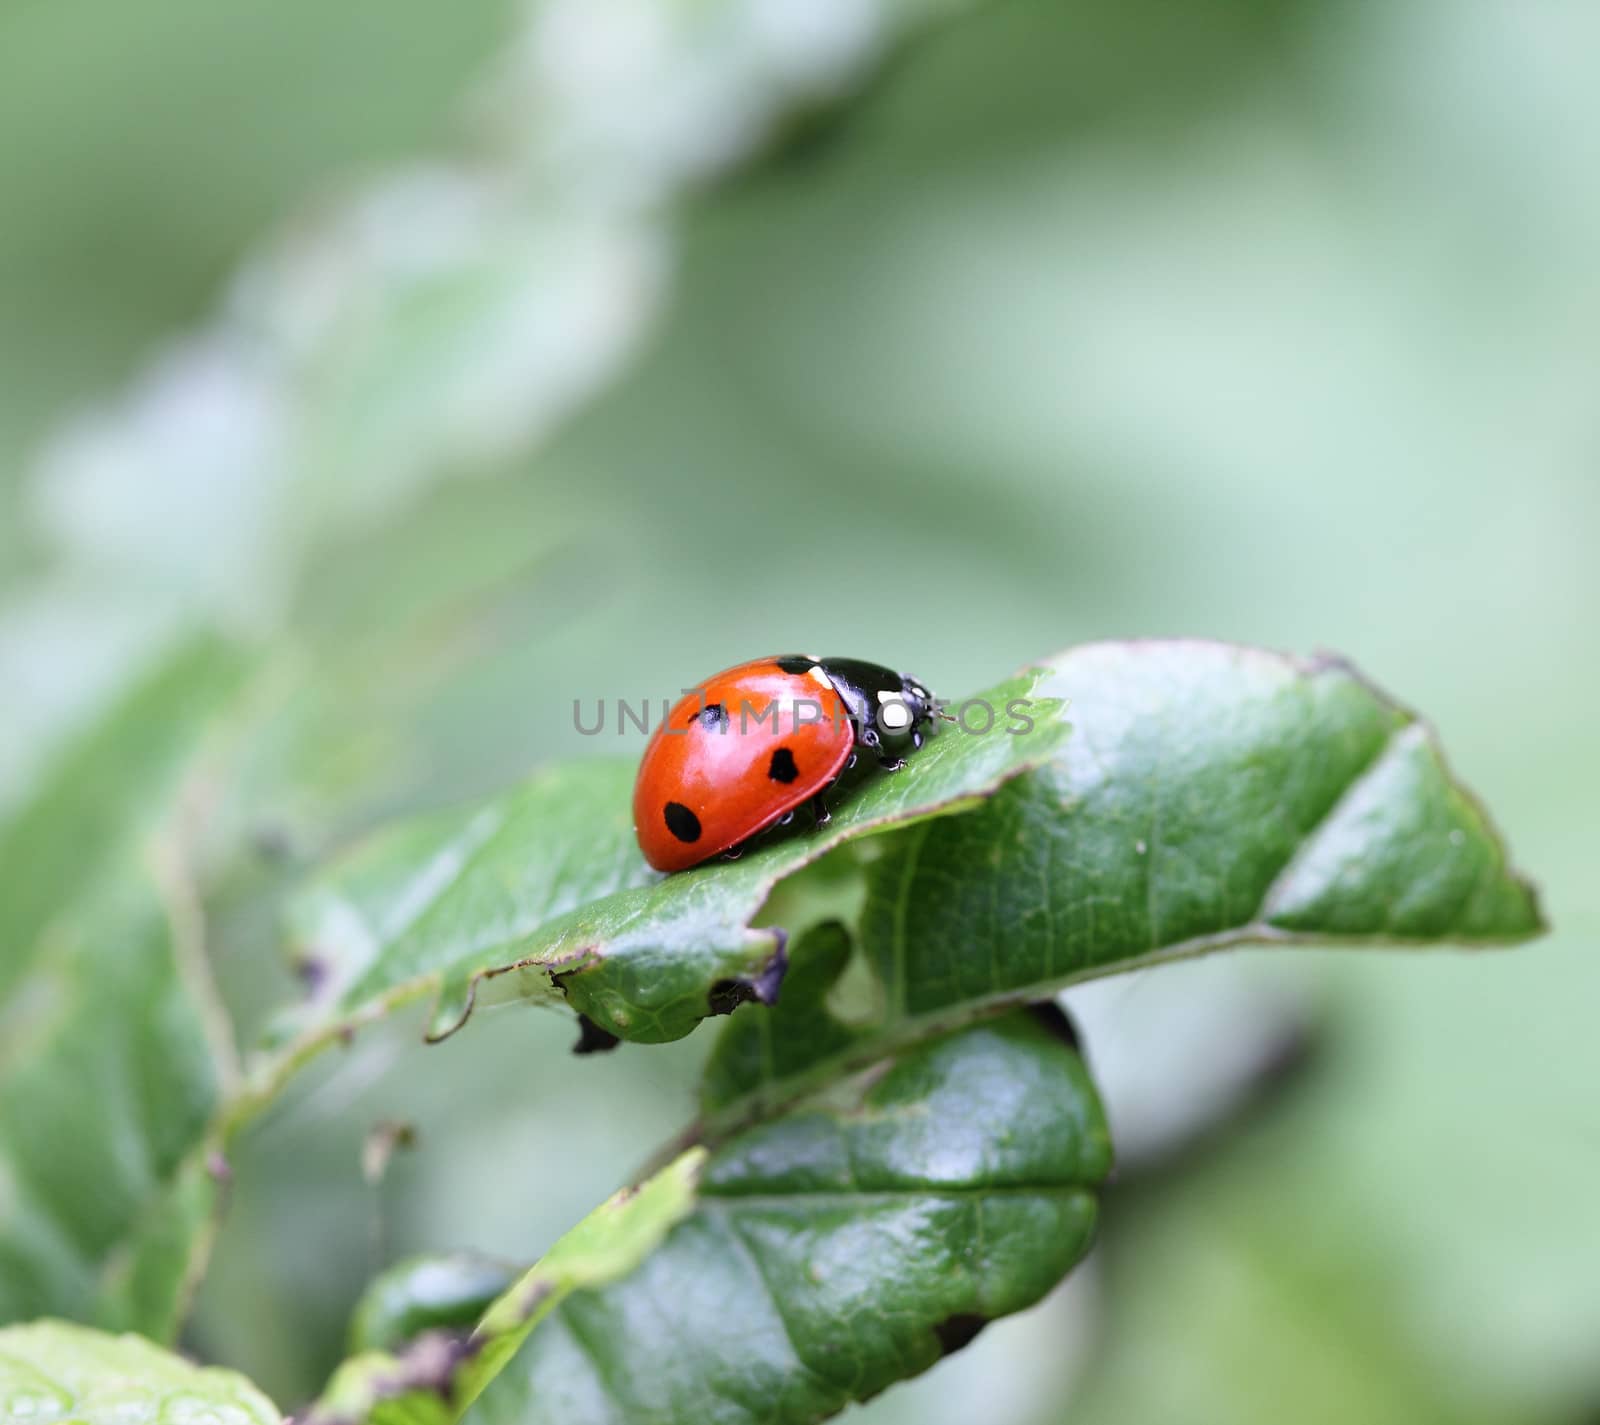 Ladybird in a grass on green leaves